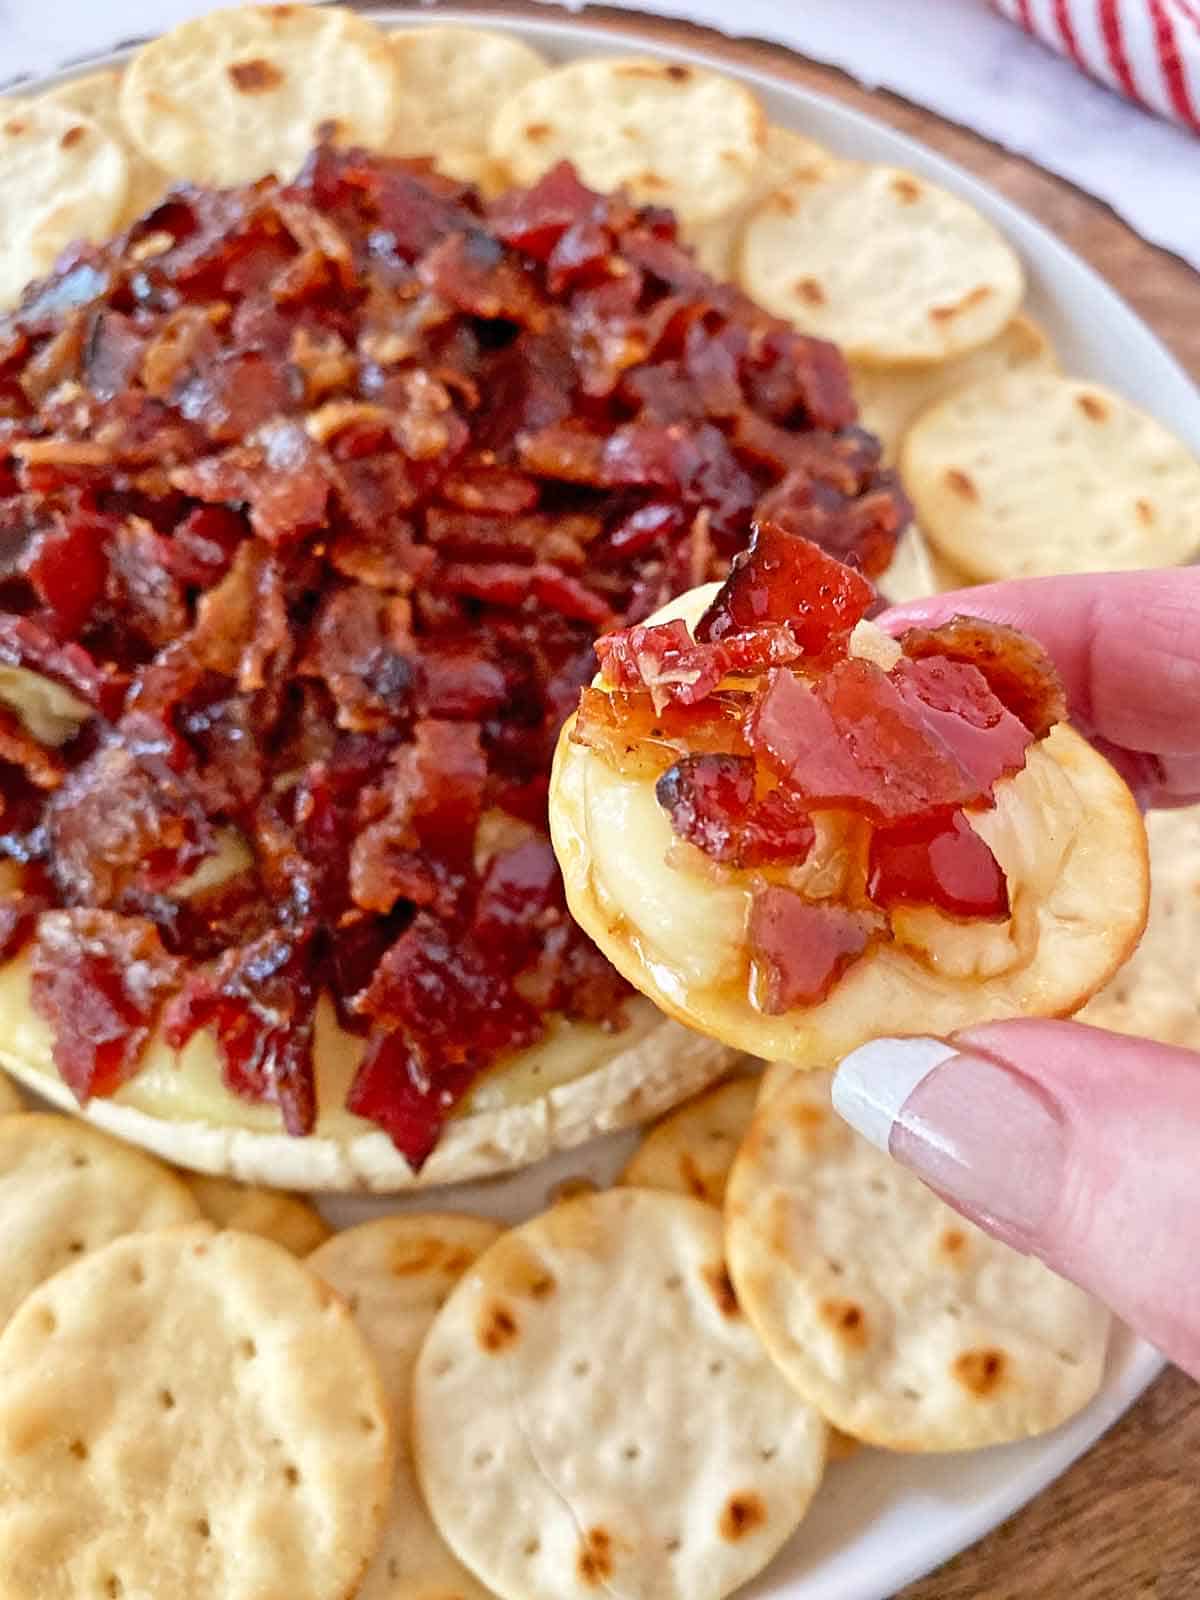 A hand holding a cracker topped with bacon and Brie cheese appetizer.